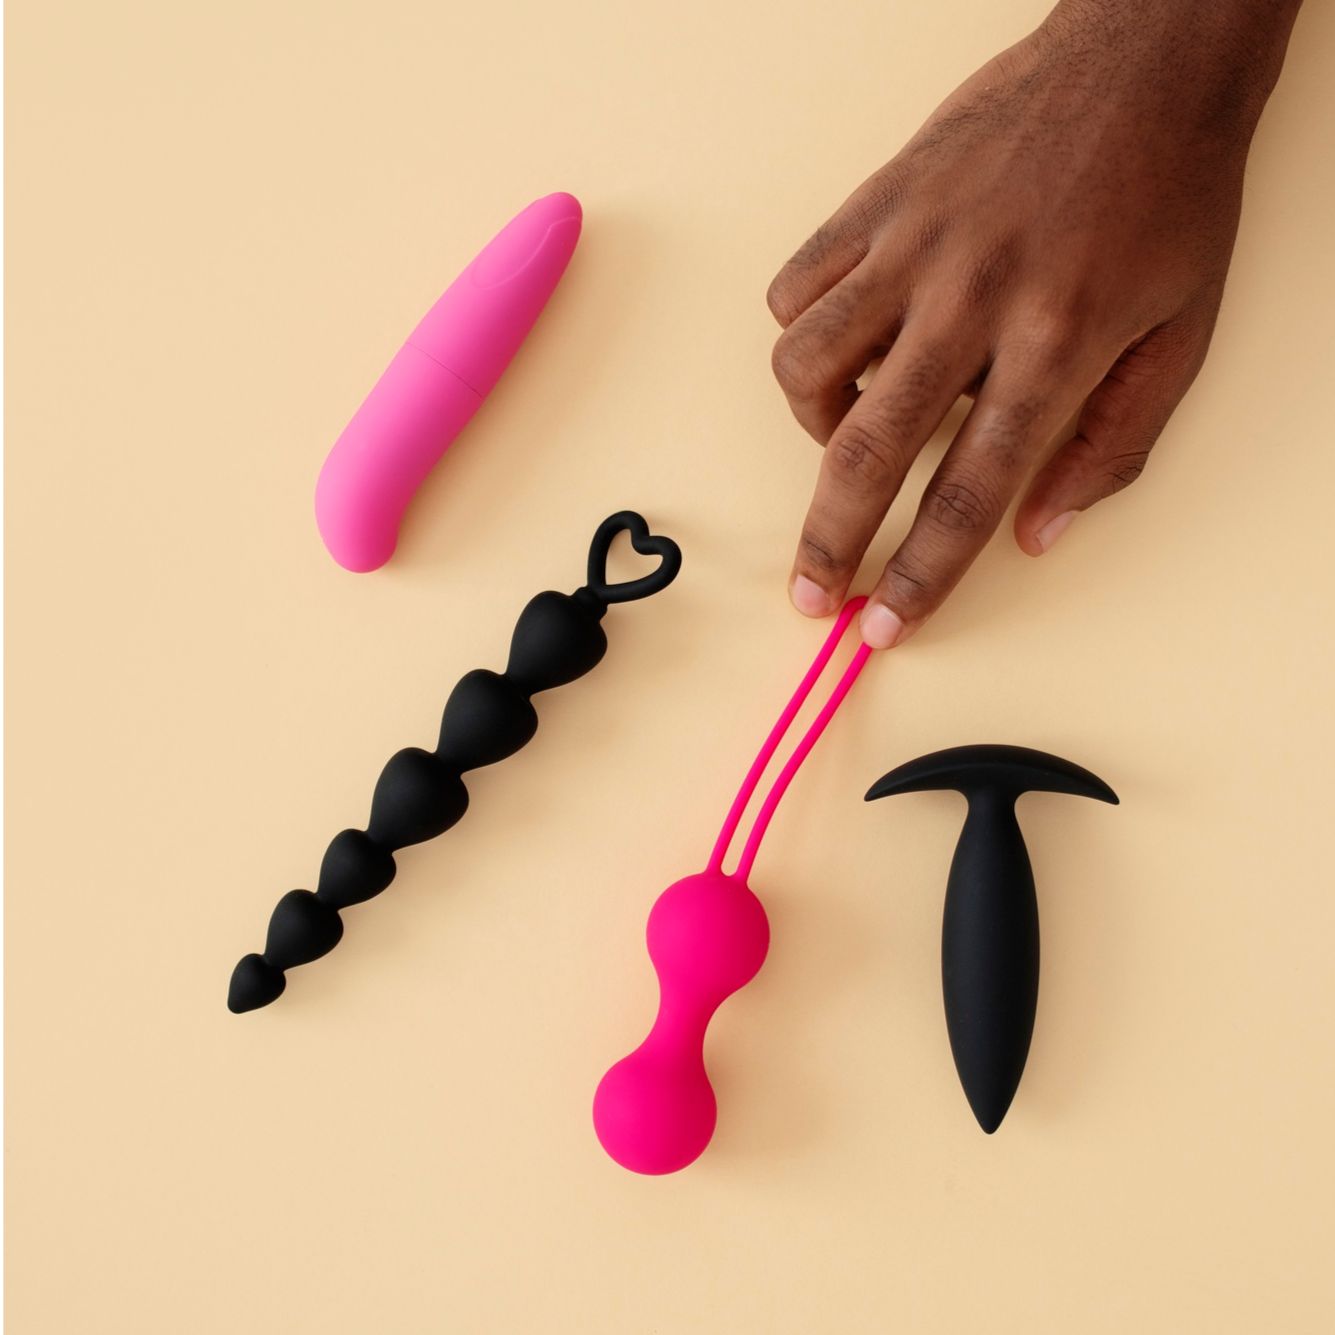 Black anal beads sex toy with black butt plug bullet vibrator and a black woman hand holding kegel balls exerciser